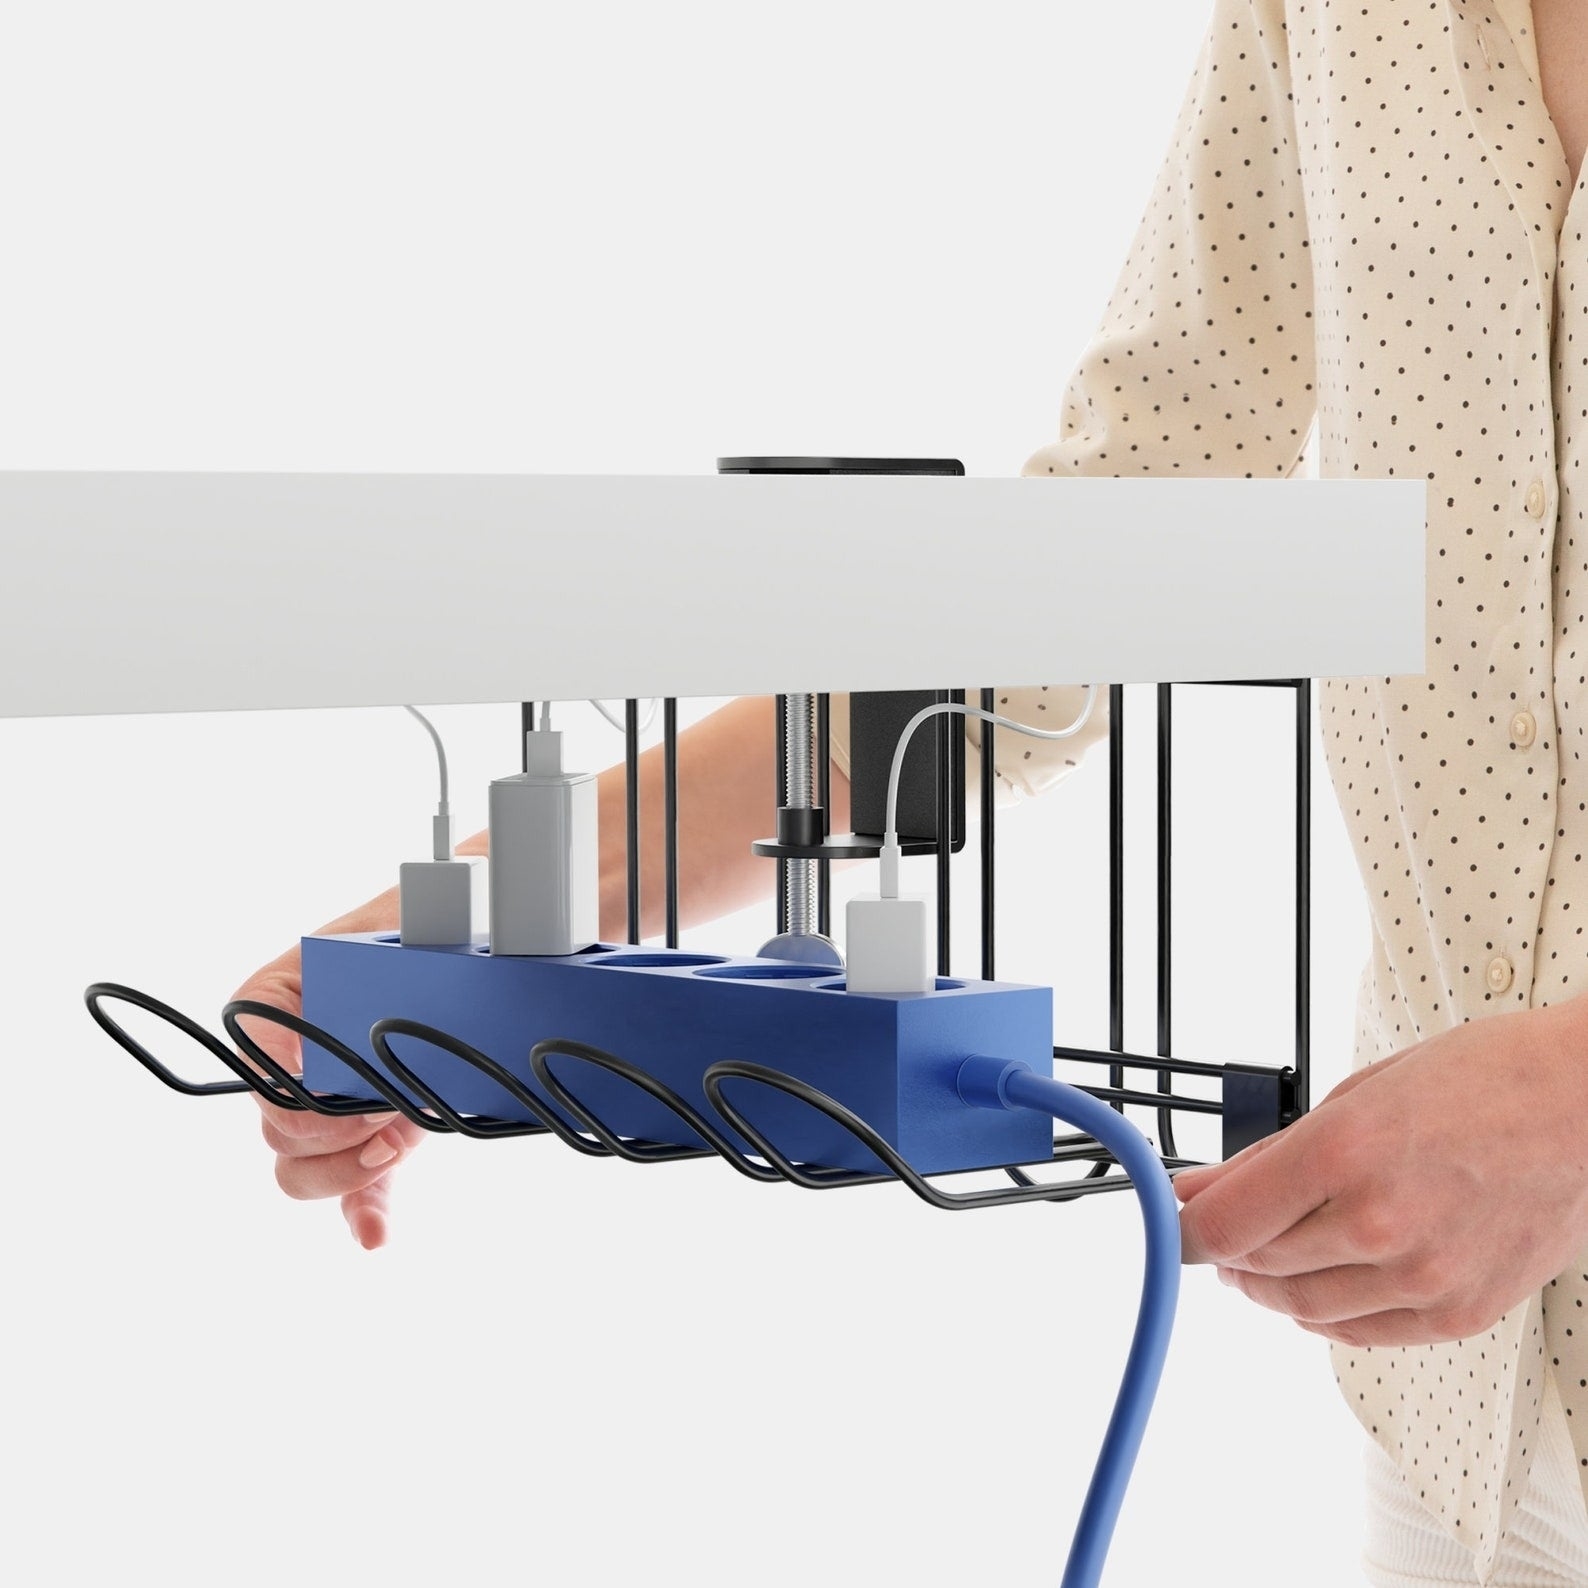 Person adjusting under-desk cable management tray with surge protector on it